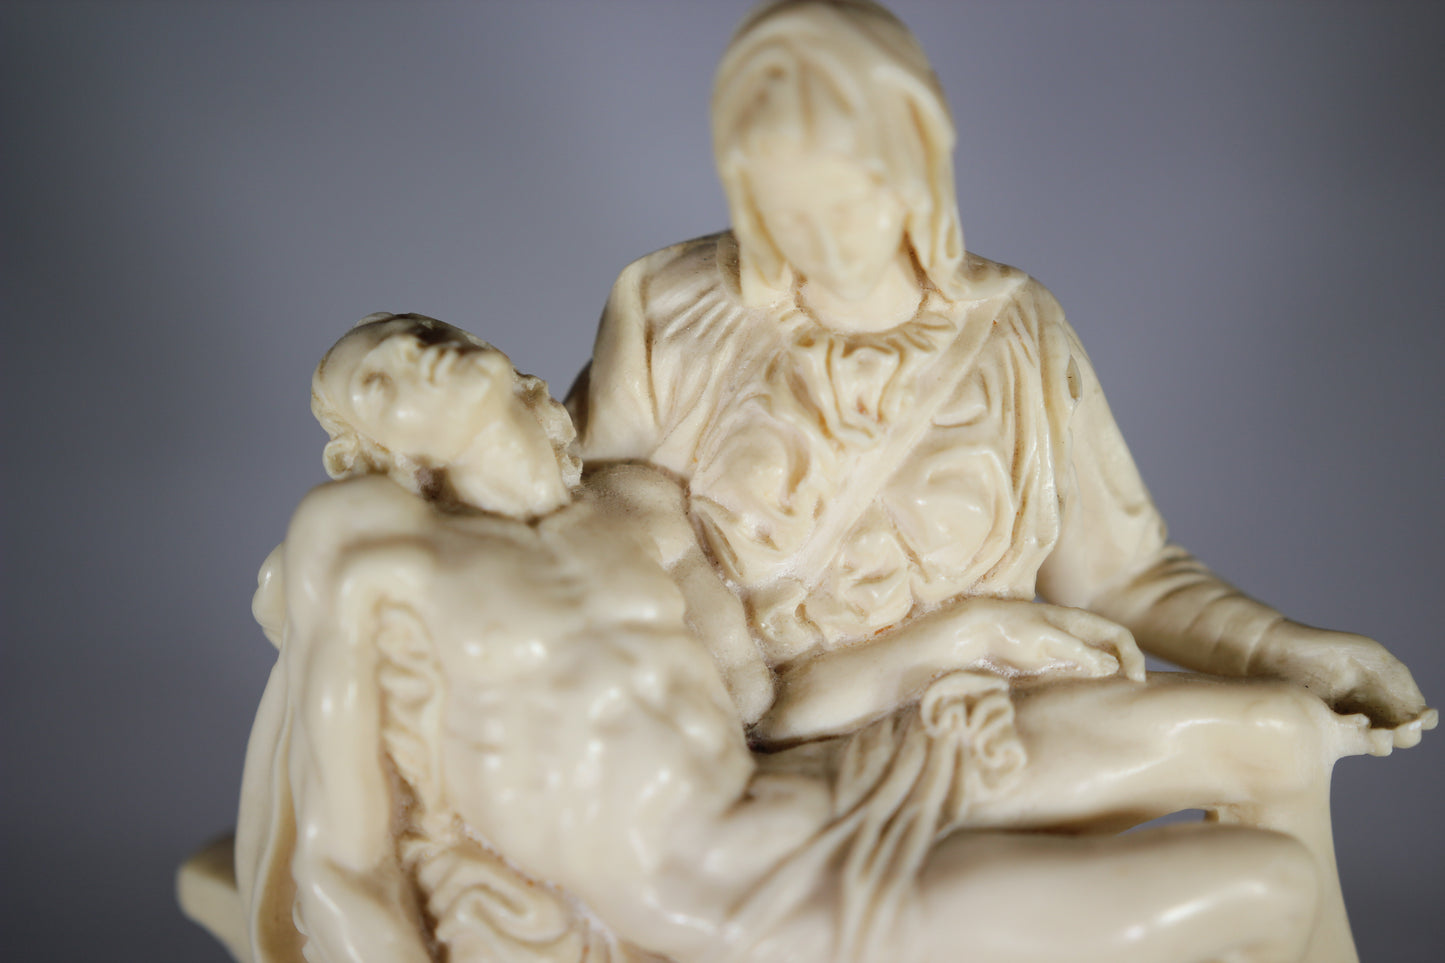 Heavy "Pieta" by A. Santini Sculpture Statue, Made in Italy